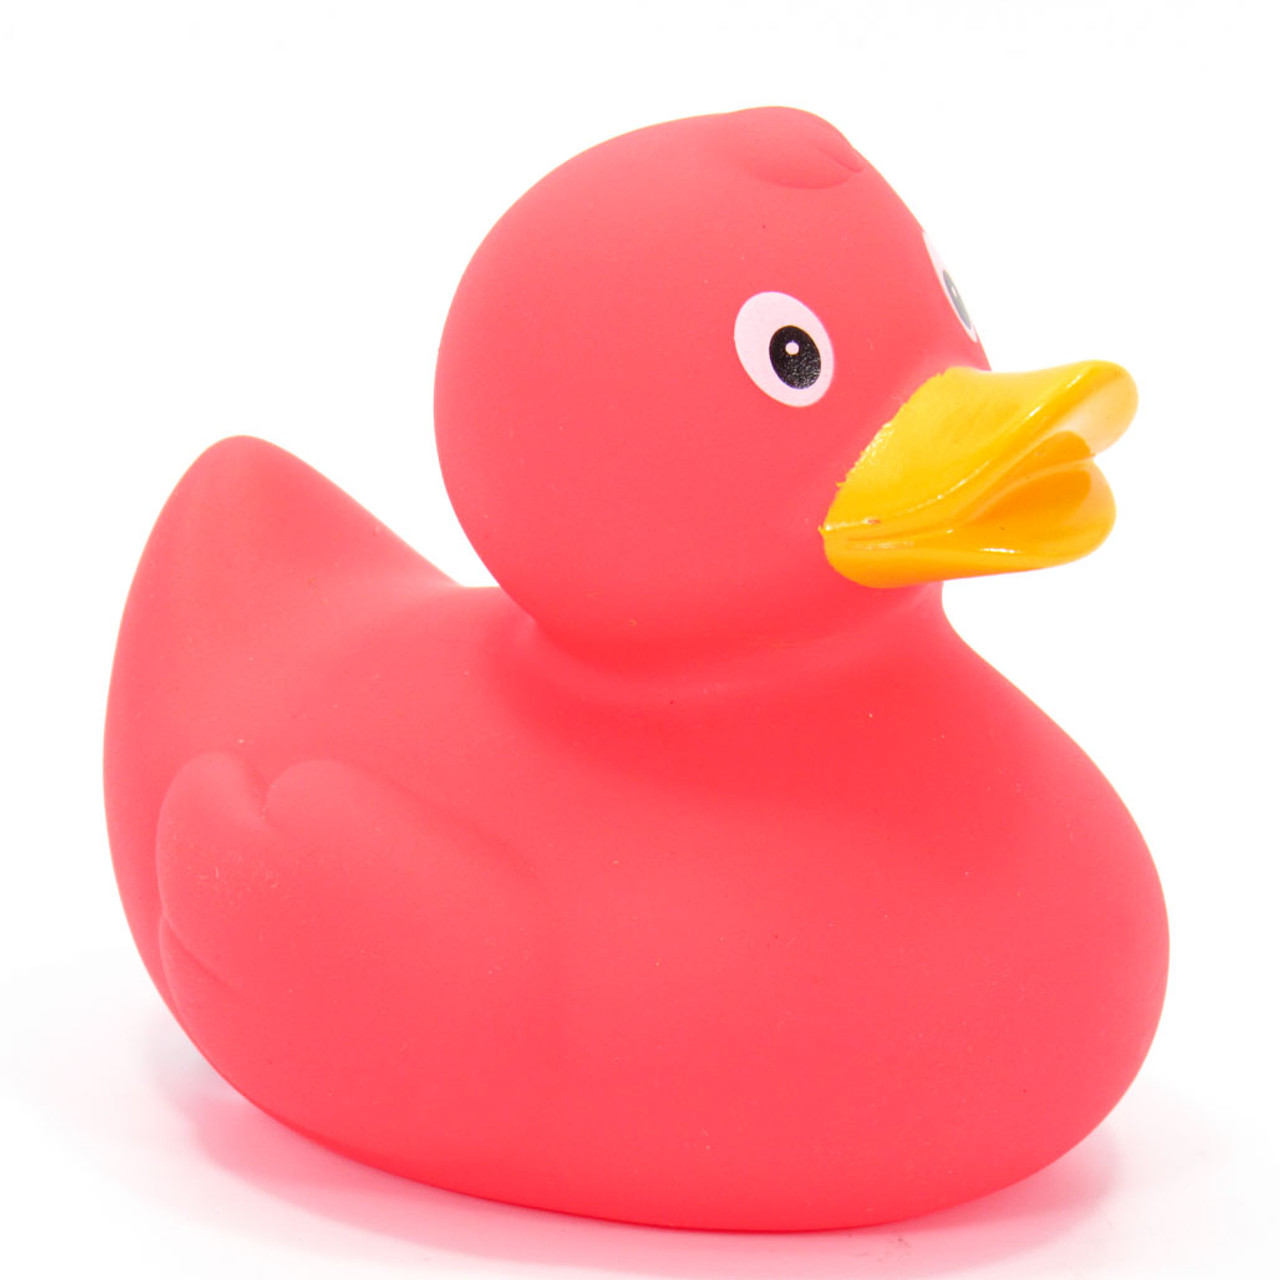 https://cdn11.bigcommerce.com/s-nf2x4/images/stencil/1280x1280/products/499/10540/pink-Rubber-Duck-ad-line-2__06763.1612107799.jpg?c=2